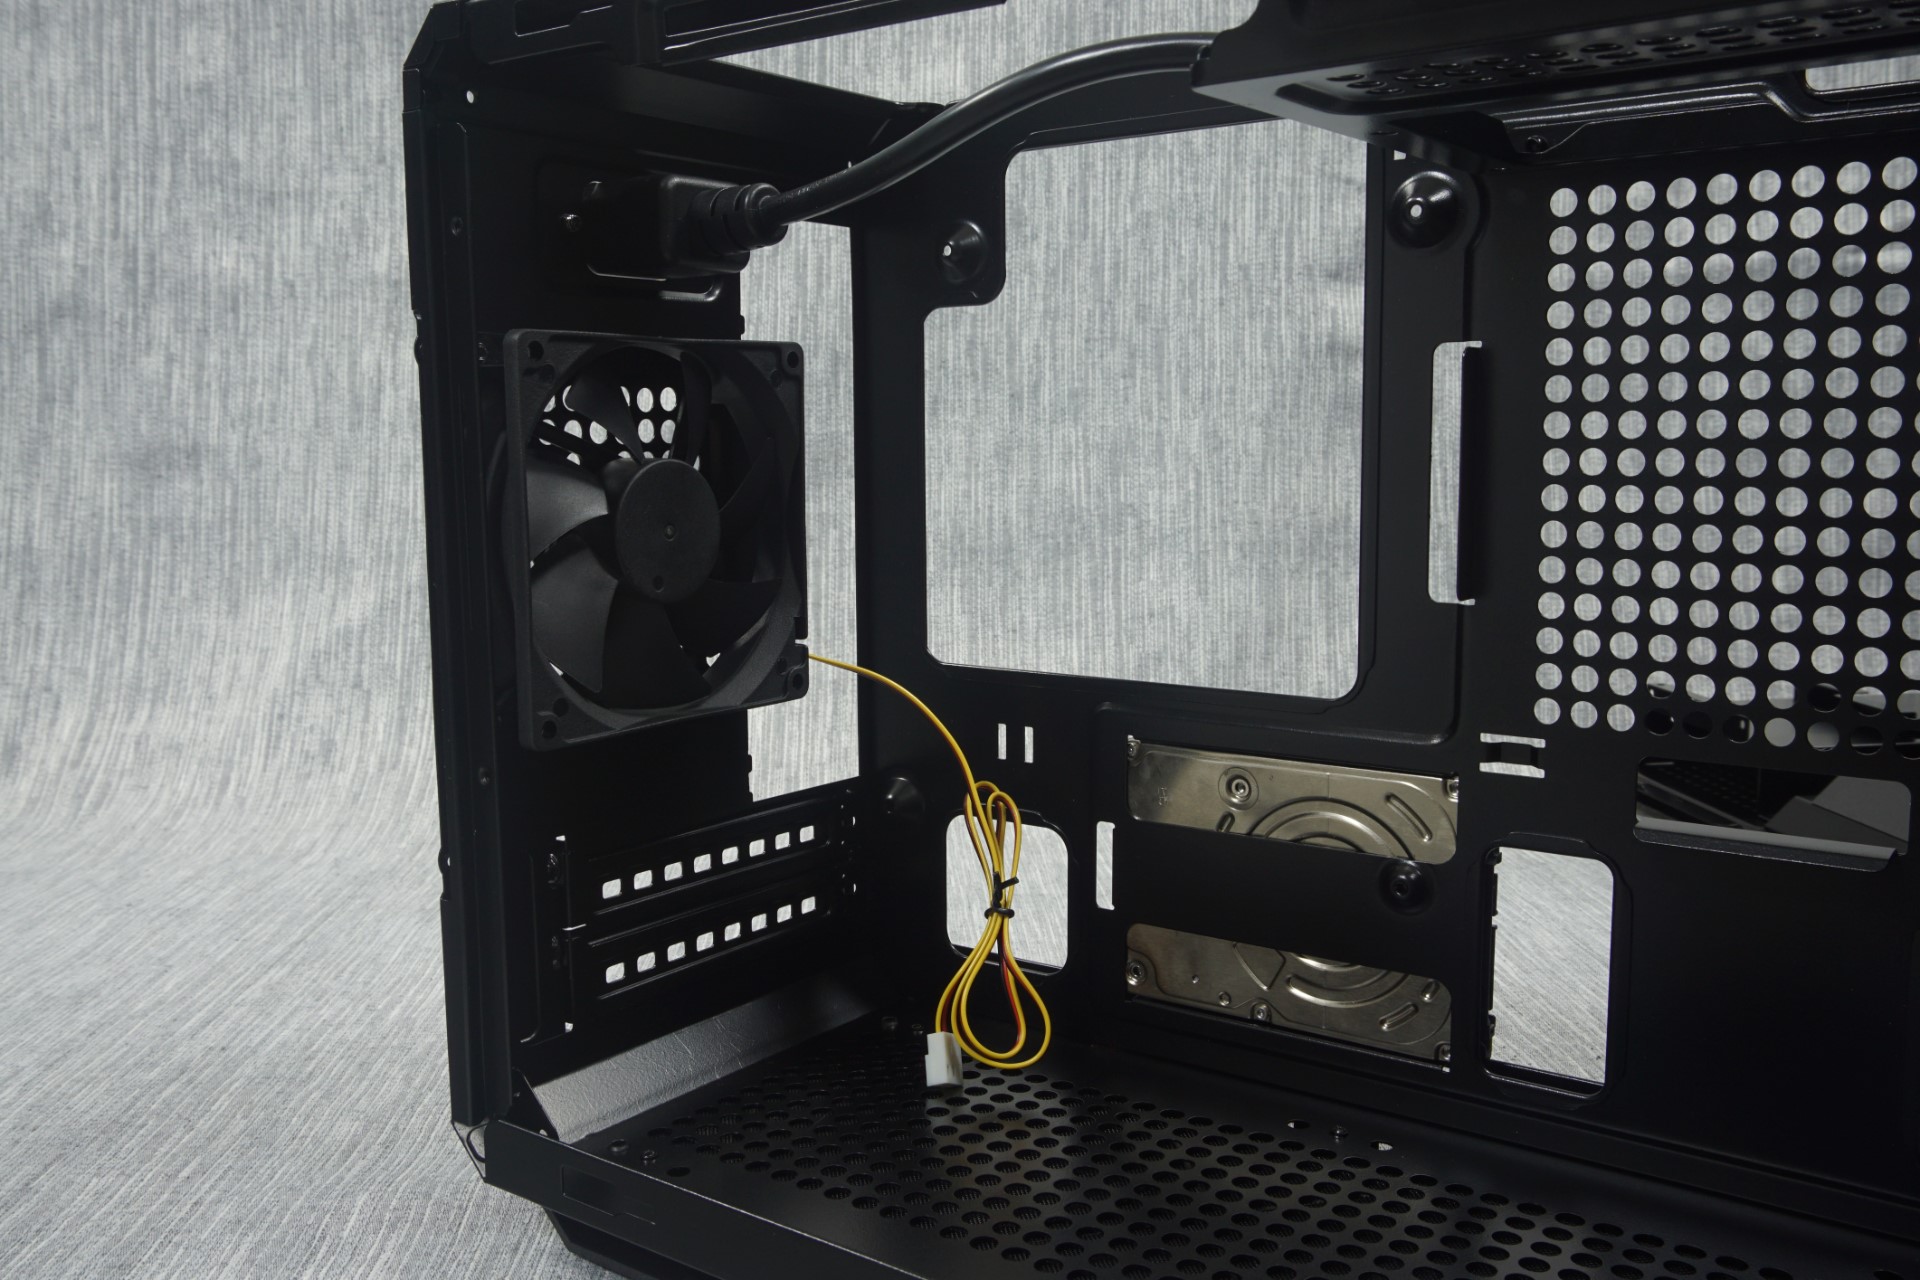 Diplomati klipning kamera The Interior of the Cougar QBX Case - The Cougar QBX Mini ITX Case Review